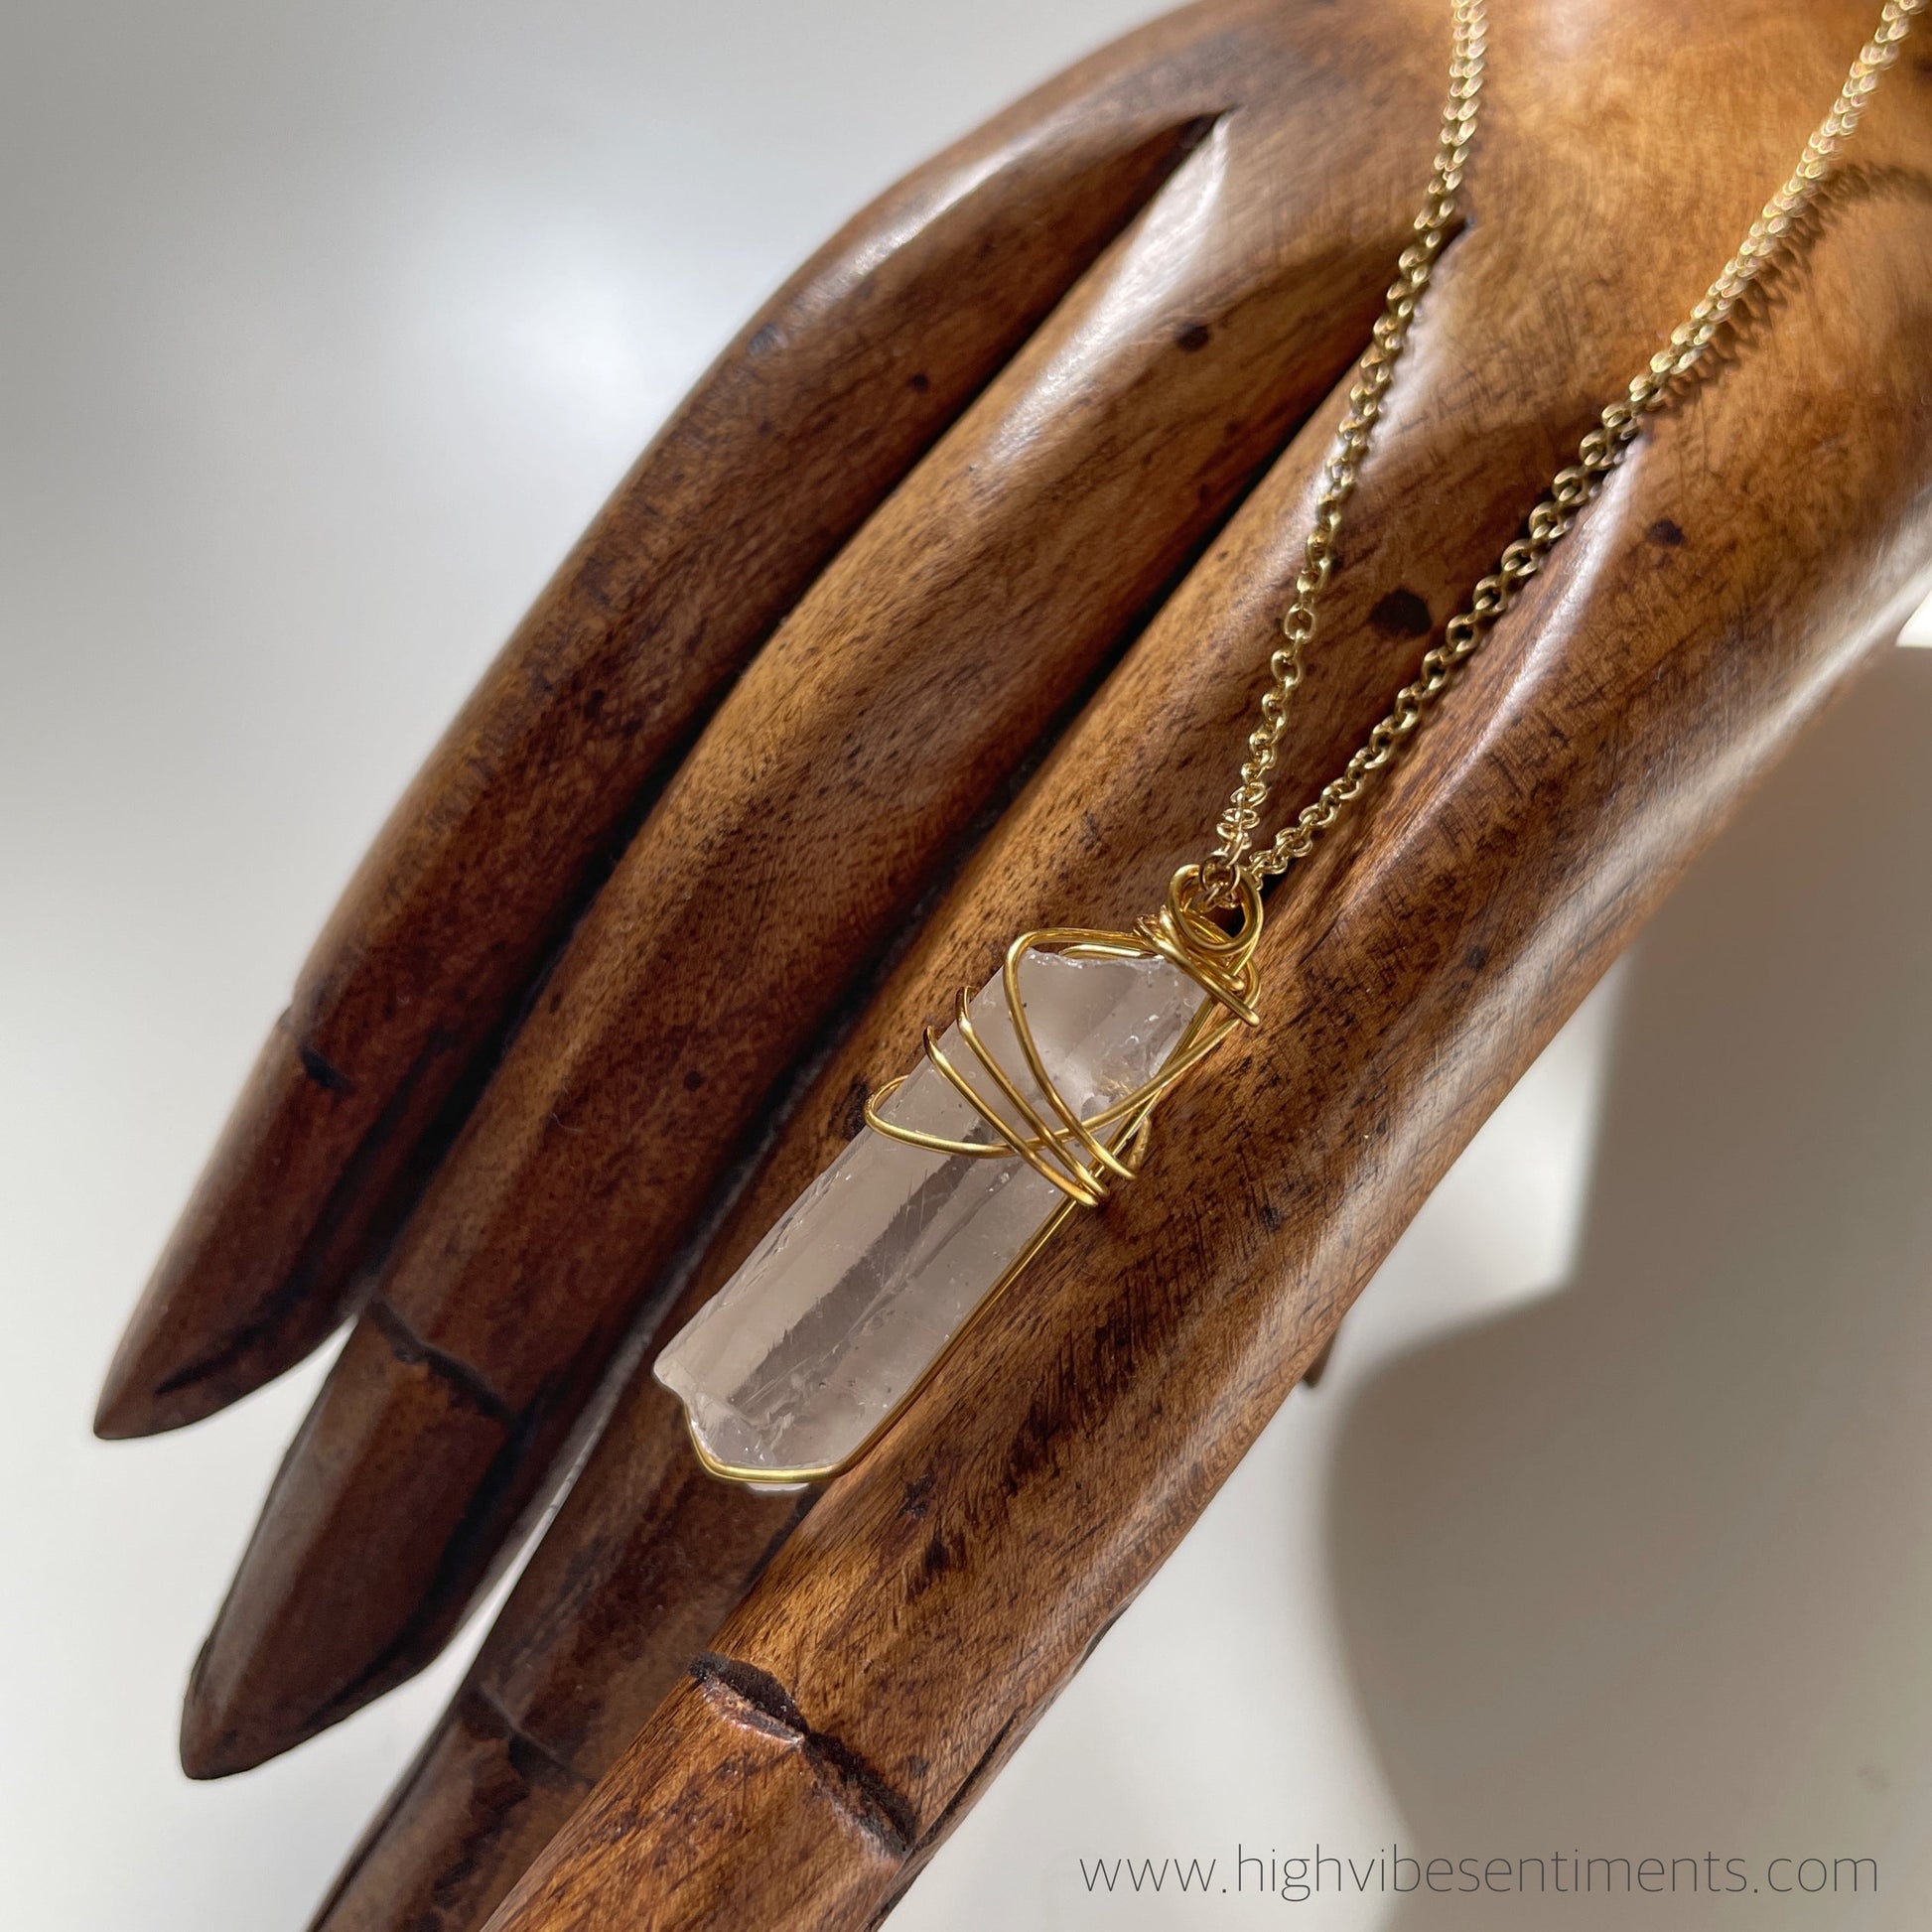 High Vibe Sentiments, Wire Wrapped Raw Quartz Necklace